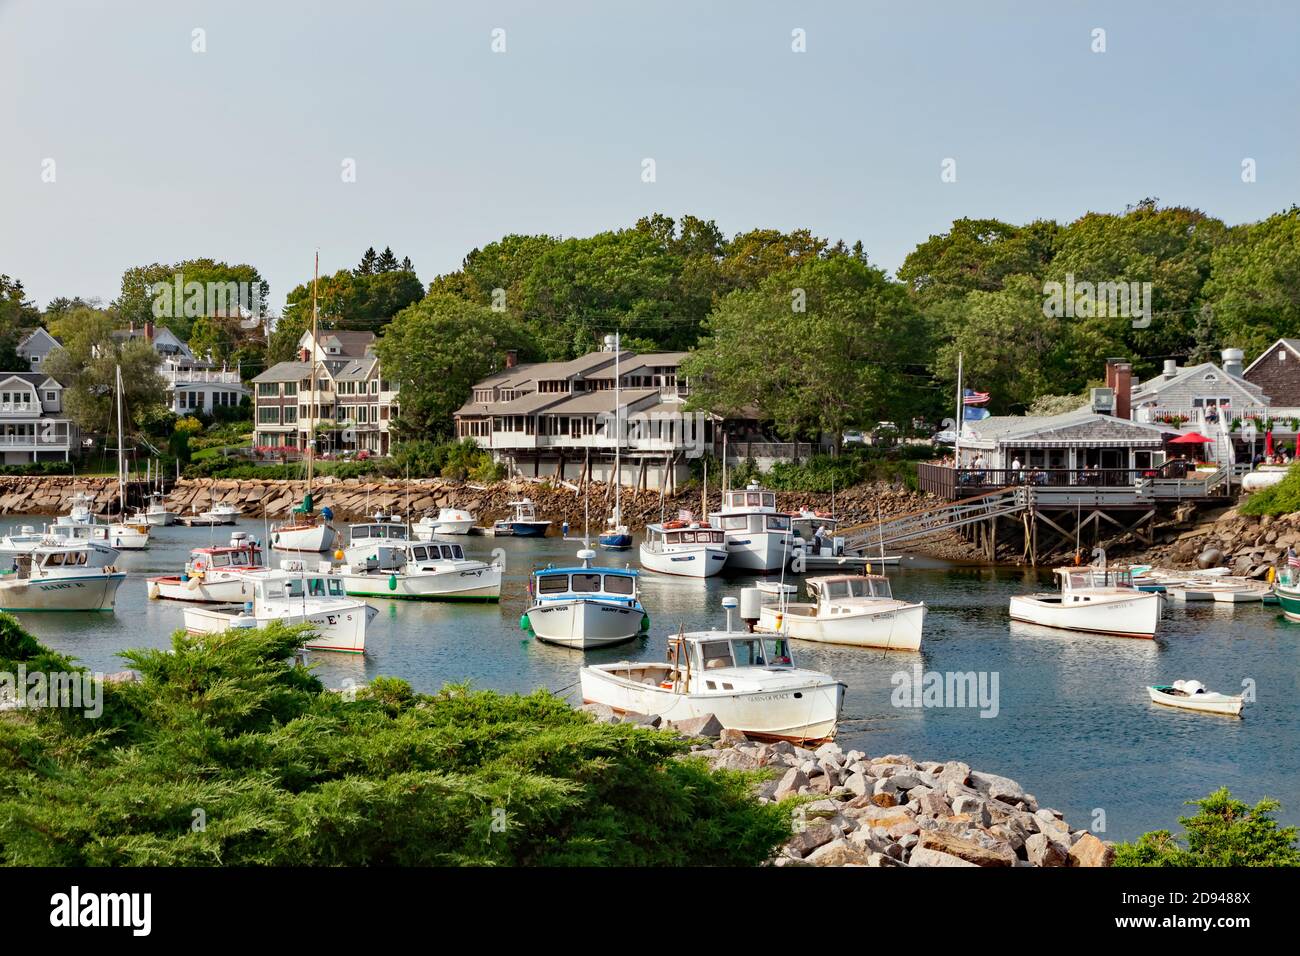 Scenic view of boats in beautiful Perkins Cove, Ogunquit, Maine, United States. Stock Photo